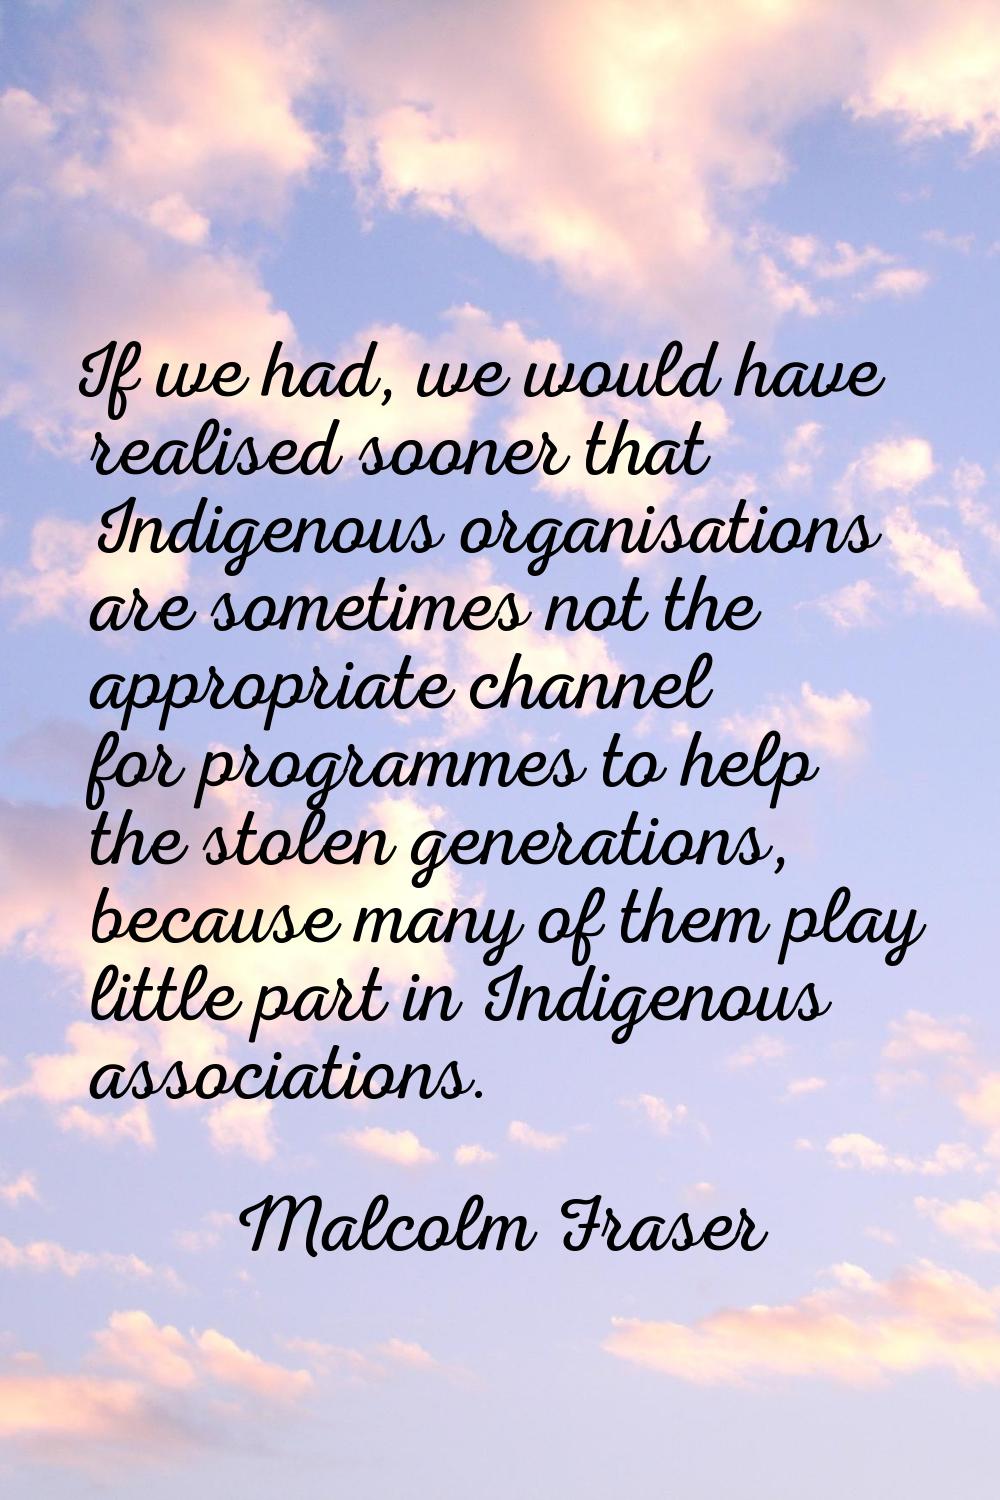 If we had, we would have realised sooner that Indigenous organisations are sometimes not the approp